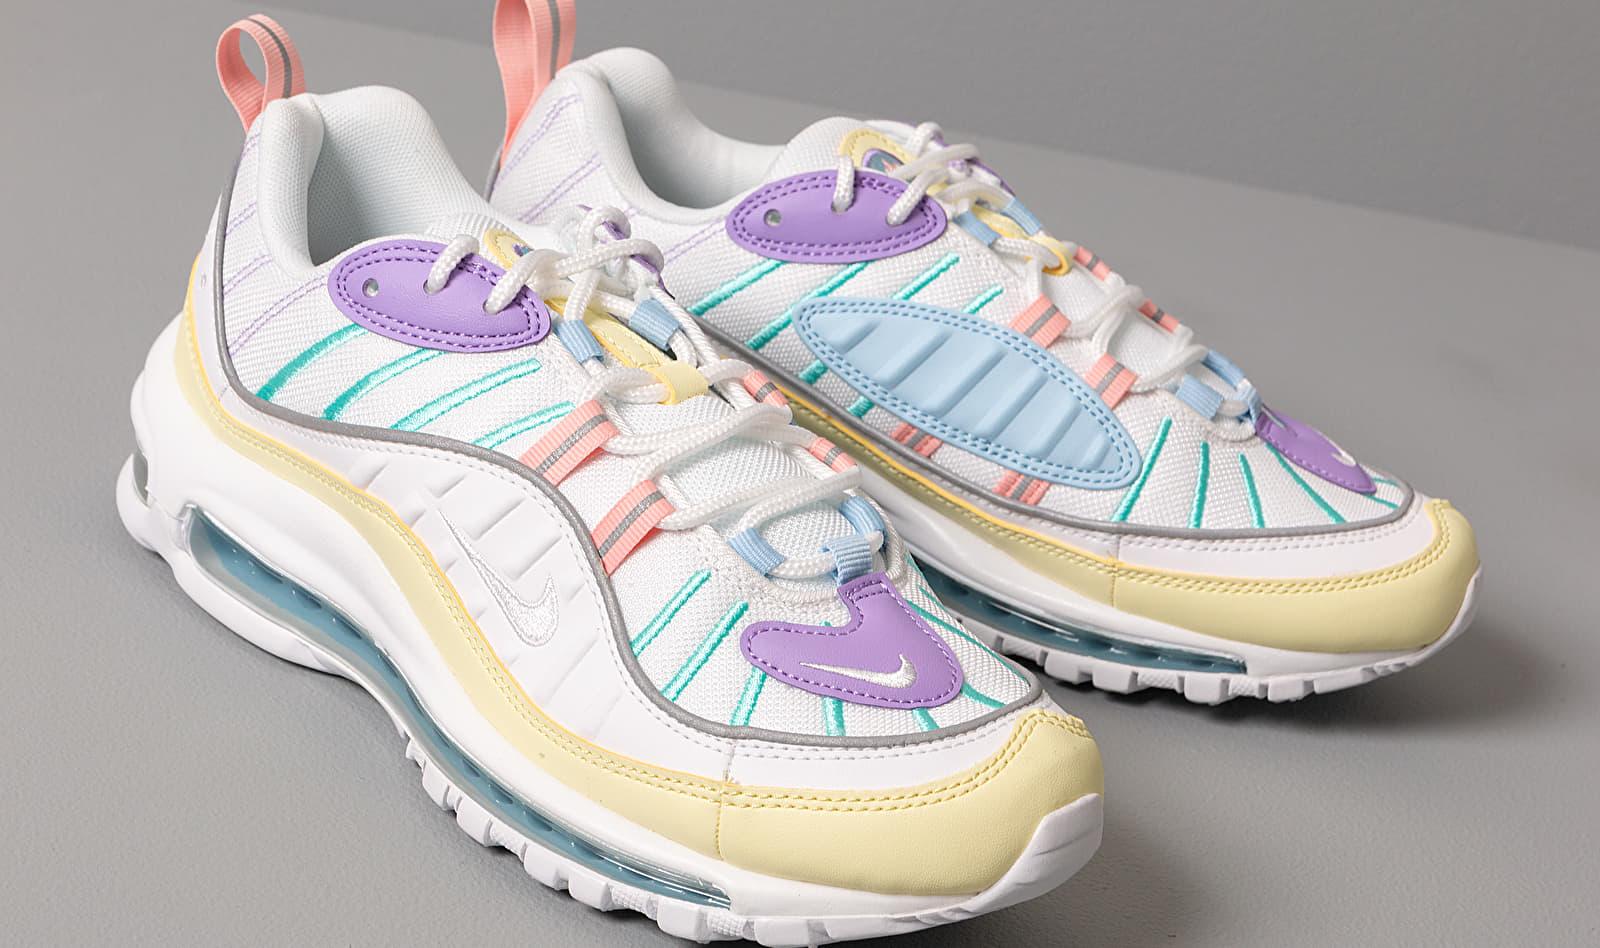 Nike Synthetic Pastel Air Max 98 Trainers in Green (White) - Lyst